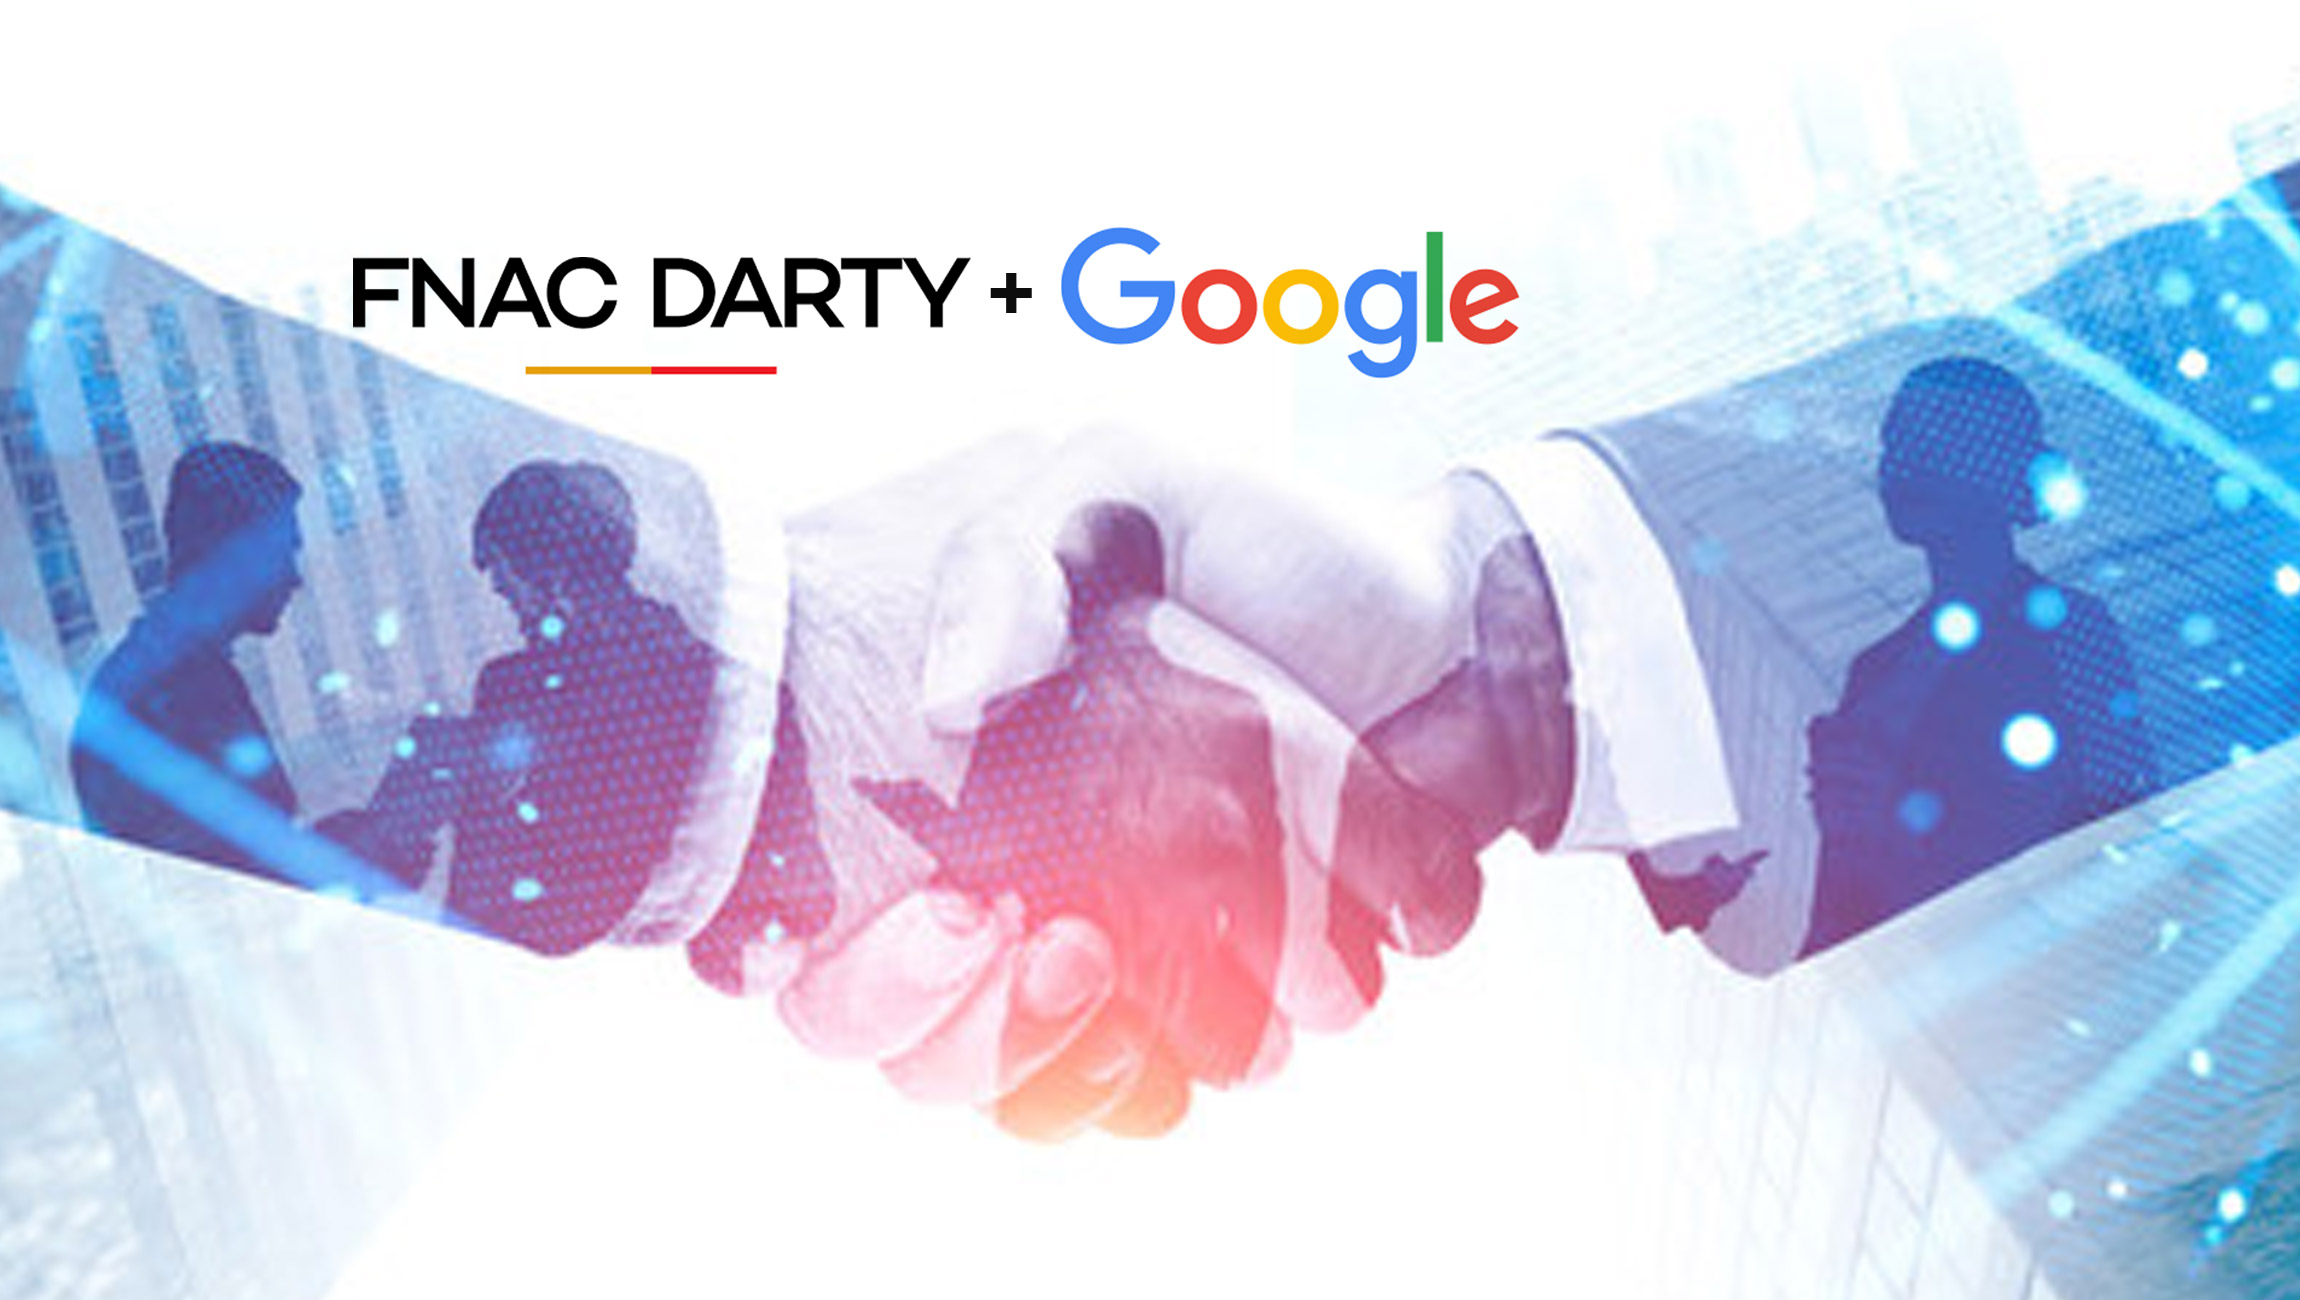 Fnac Darty Forms a New Partnership with Google on Data and Cloud to Accelerate its Digital Trajectory and the Execution of its Strategic Plan